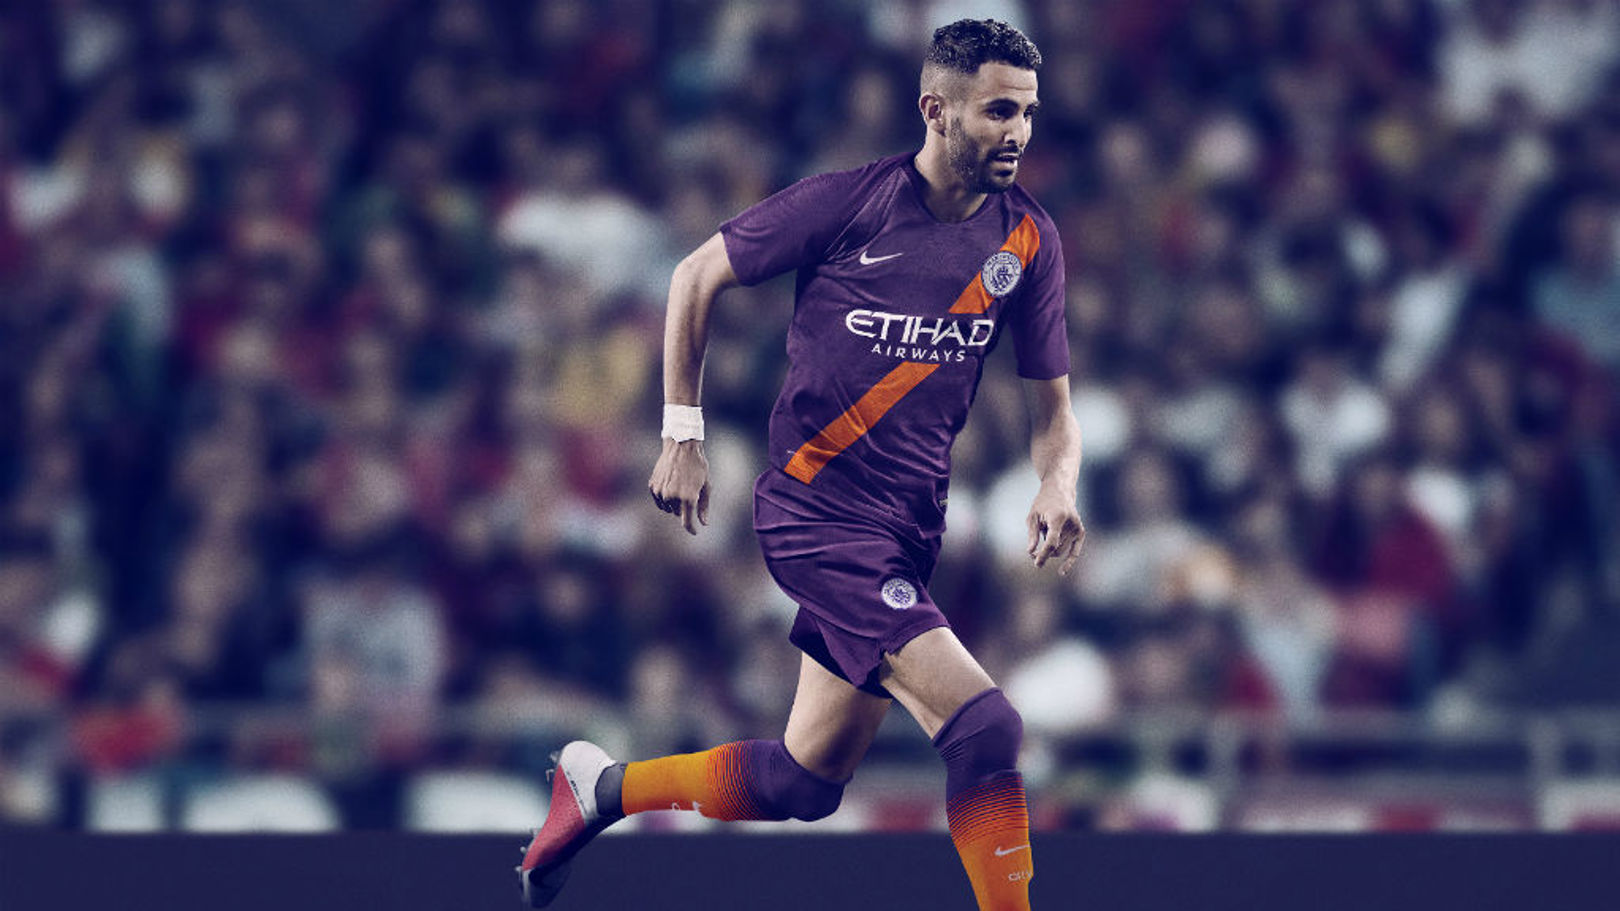 REVEALED: The new City third kit, inspired by the past and present